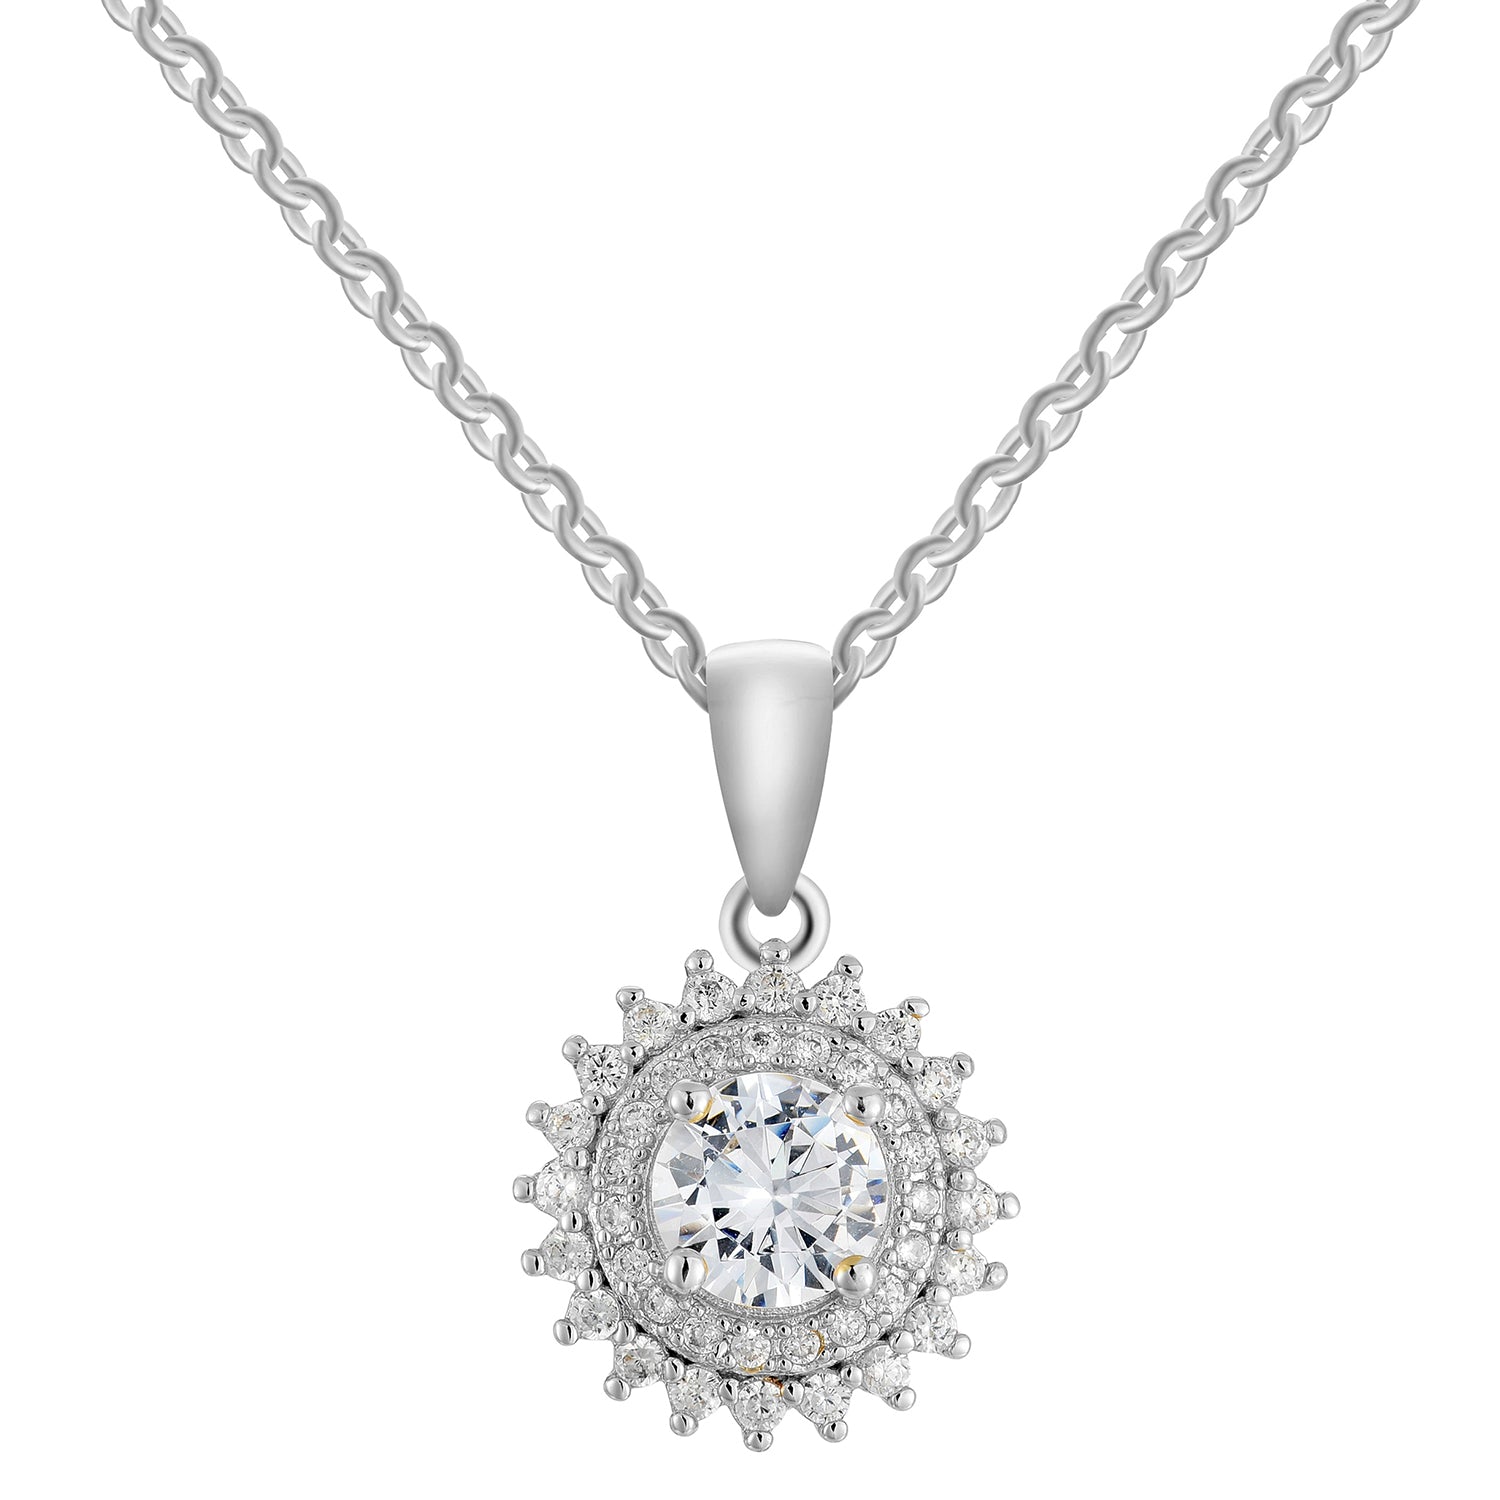 Juno 18k White Gold Plated Silver Pendant Necklace with Simulated Diamond CZ Crystals